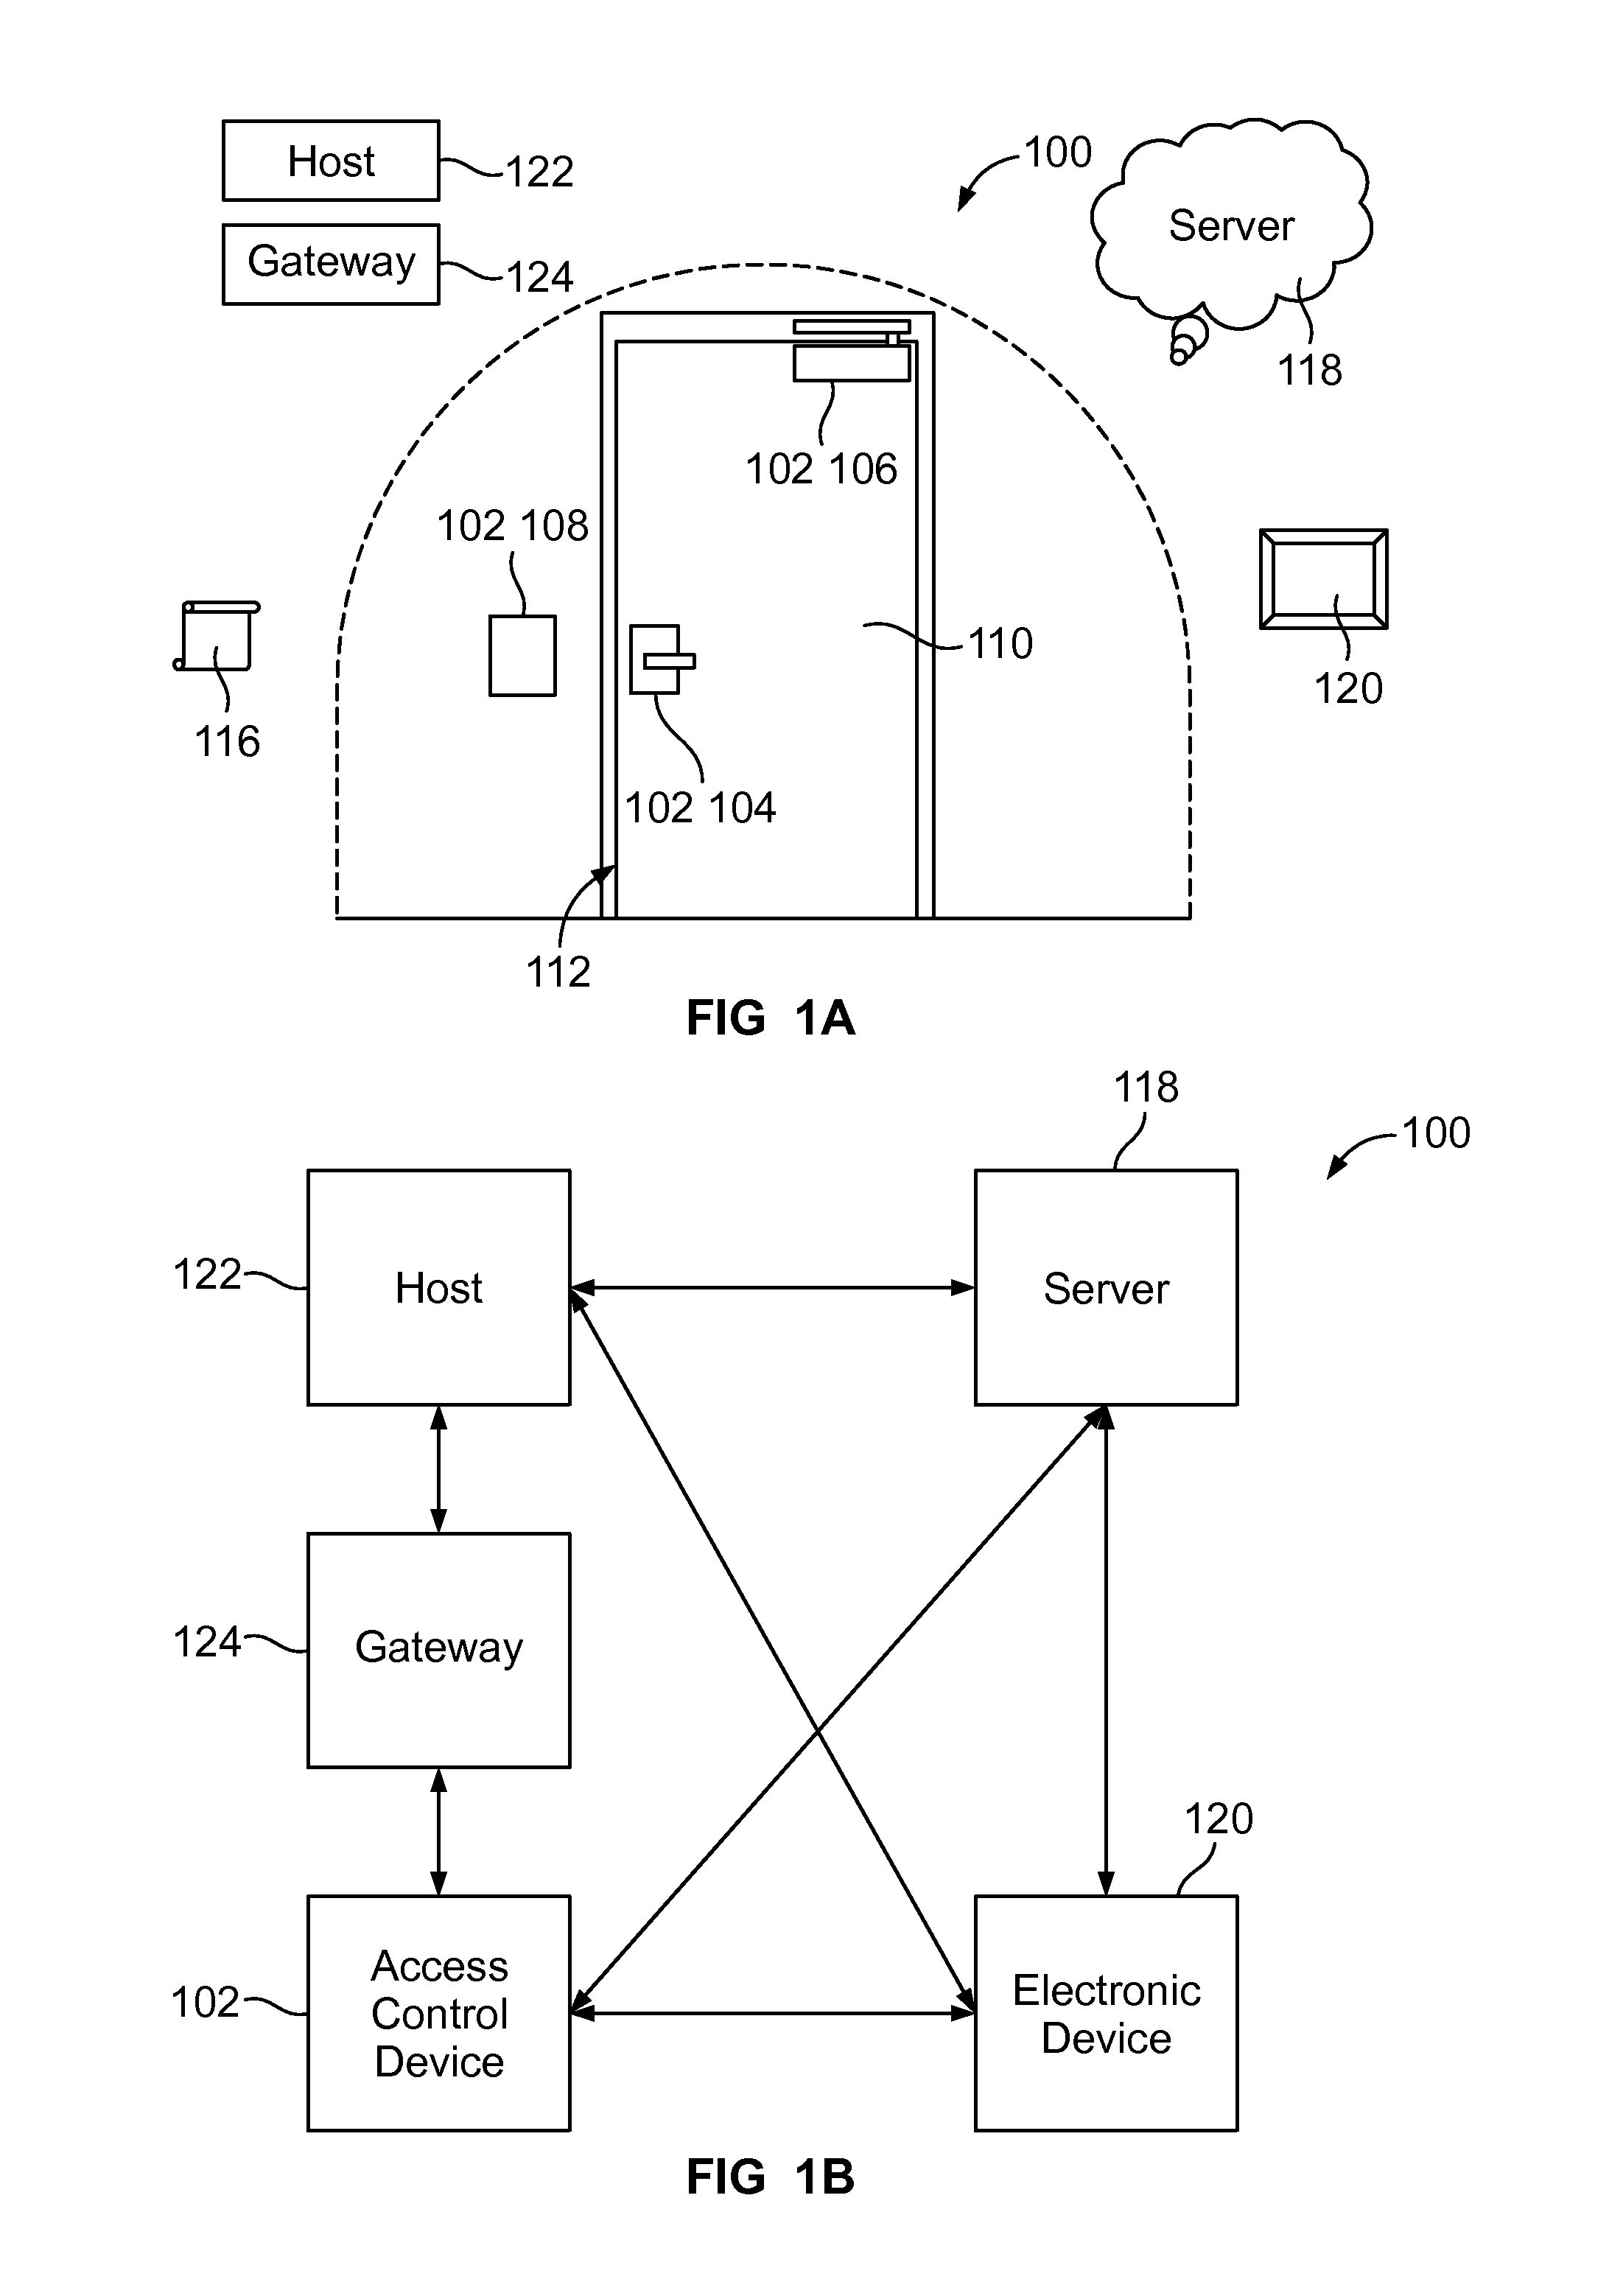 Multifunctional access control device